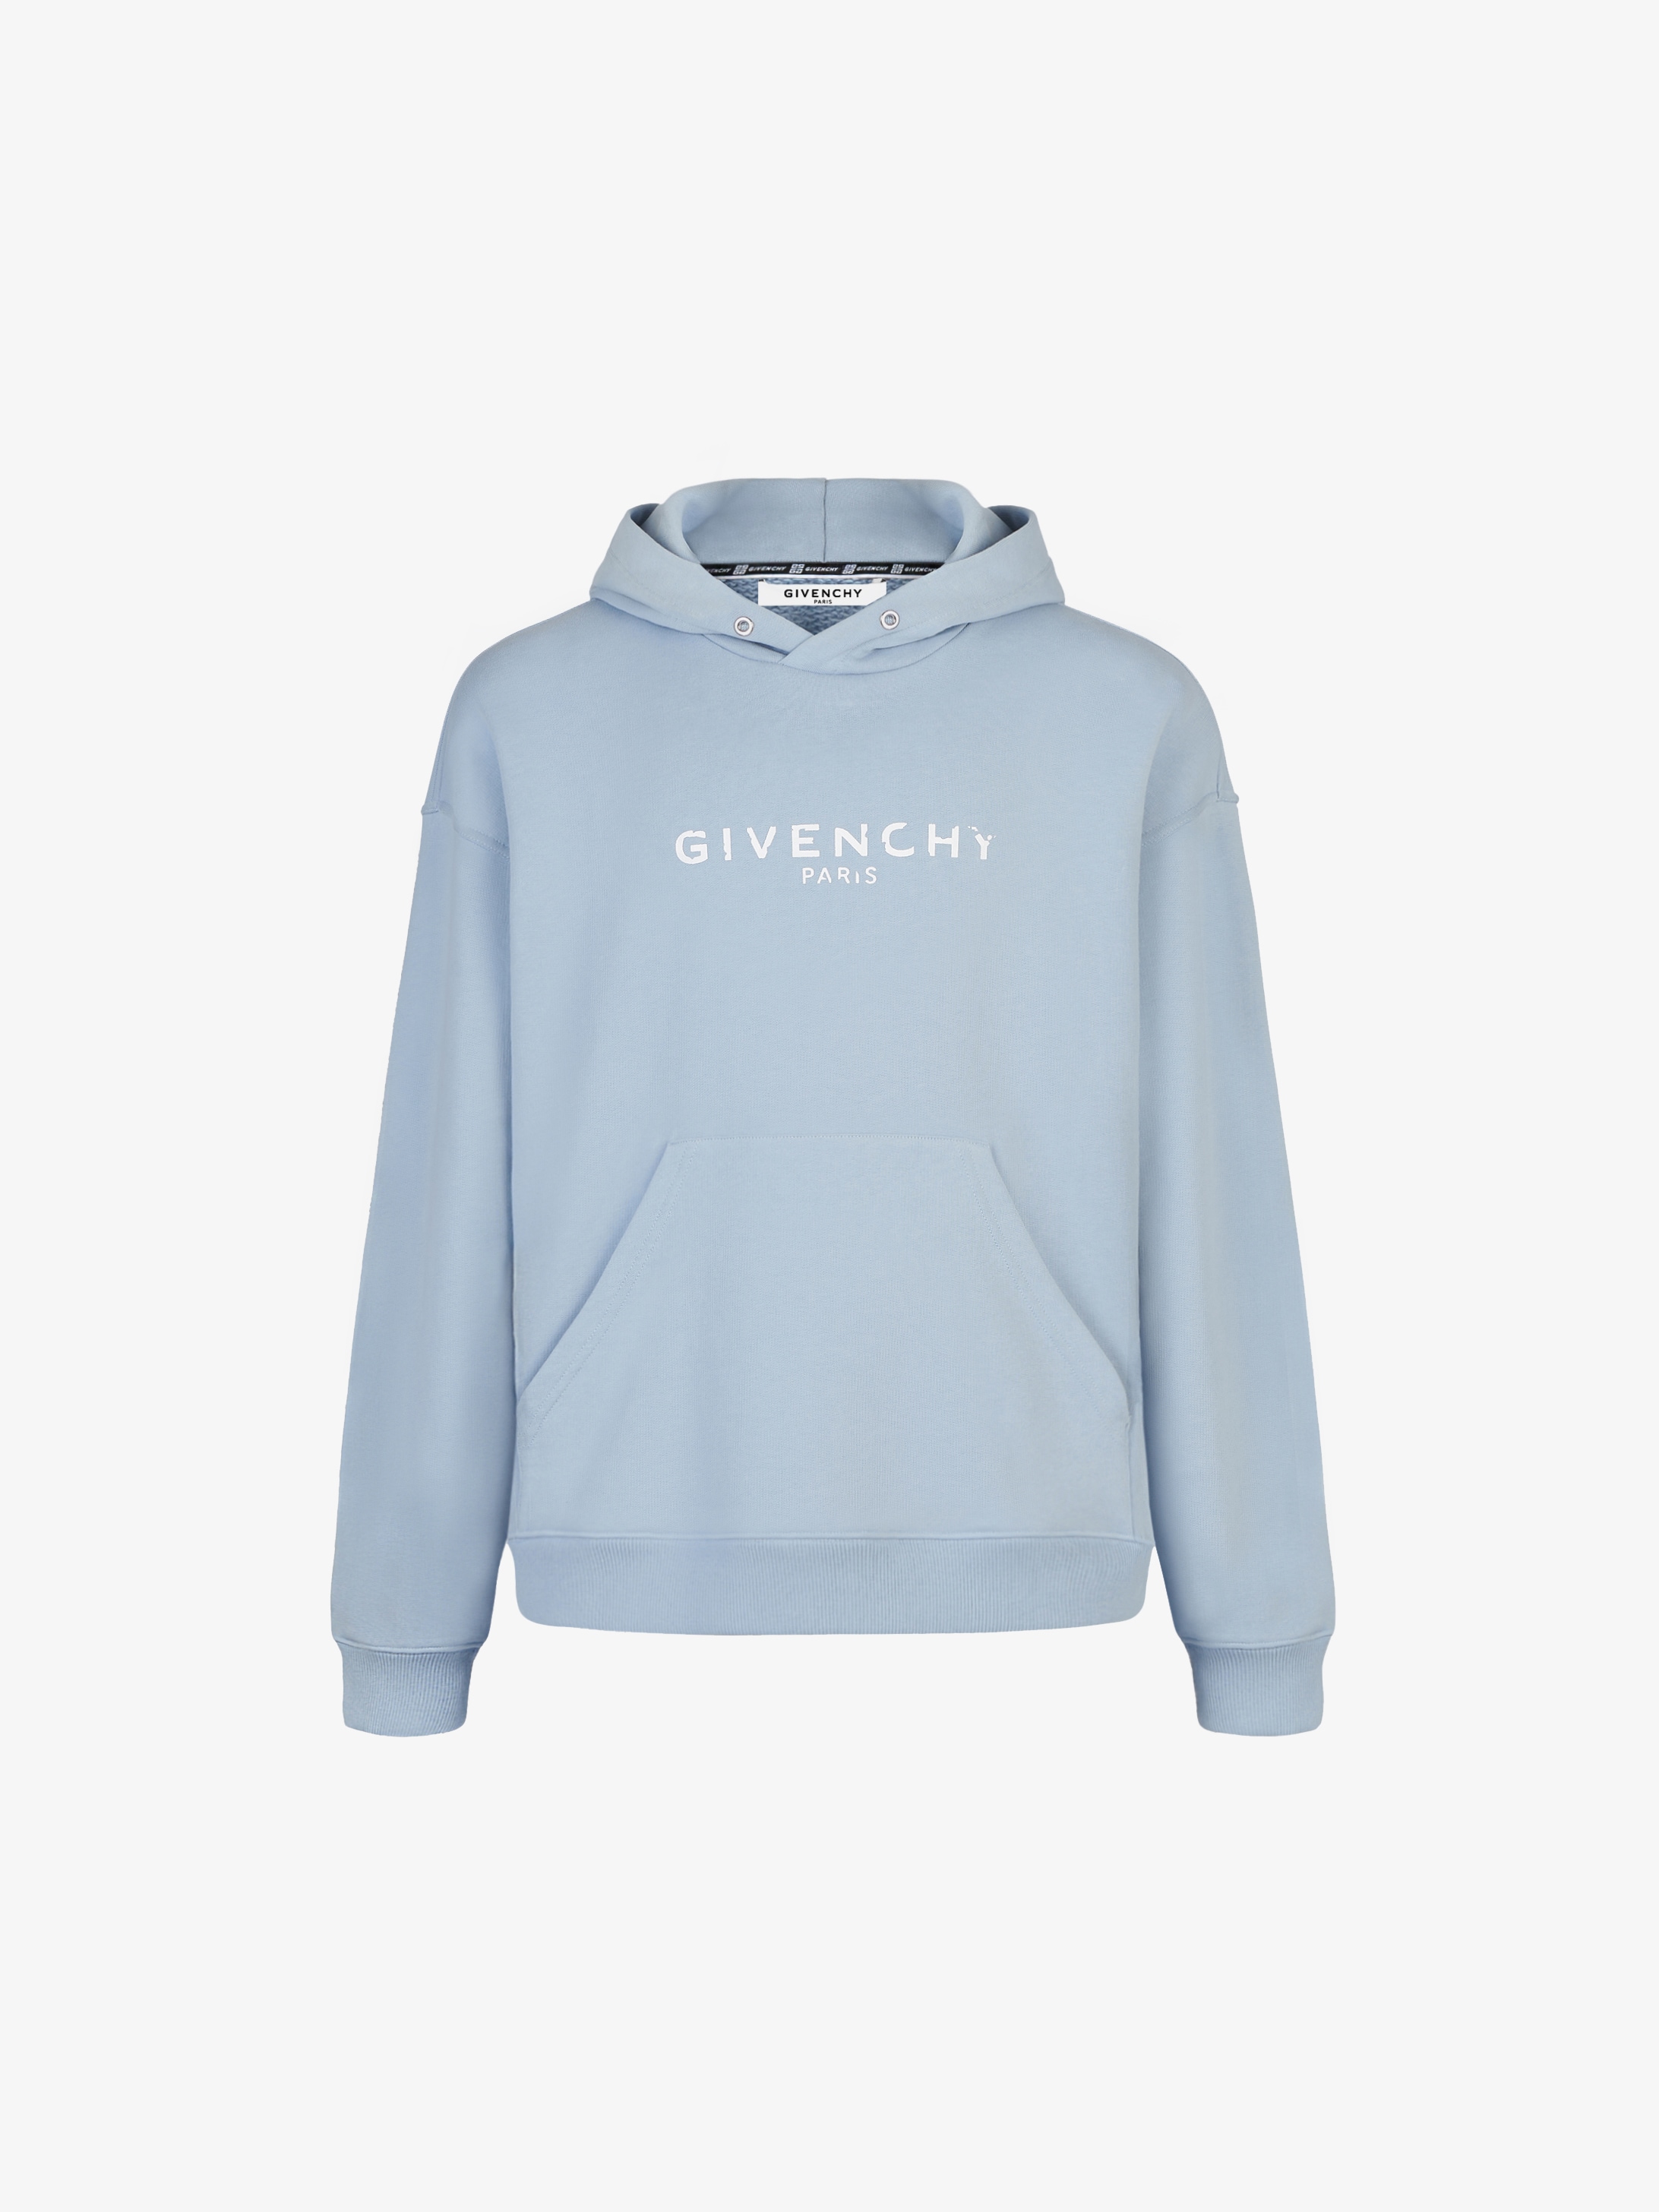 givenchy blue sweater off 57% - www 